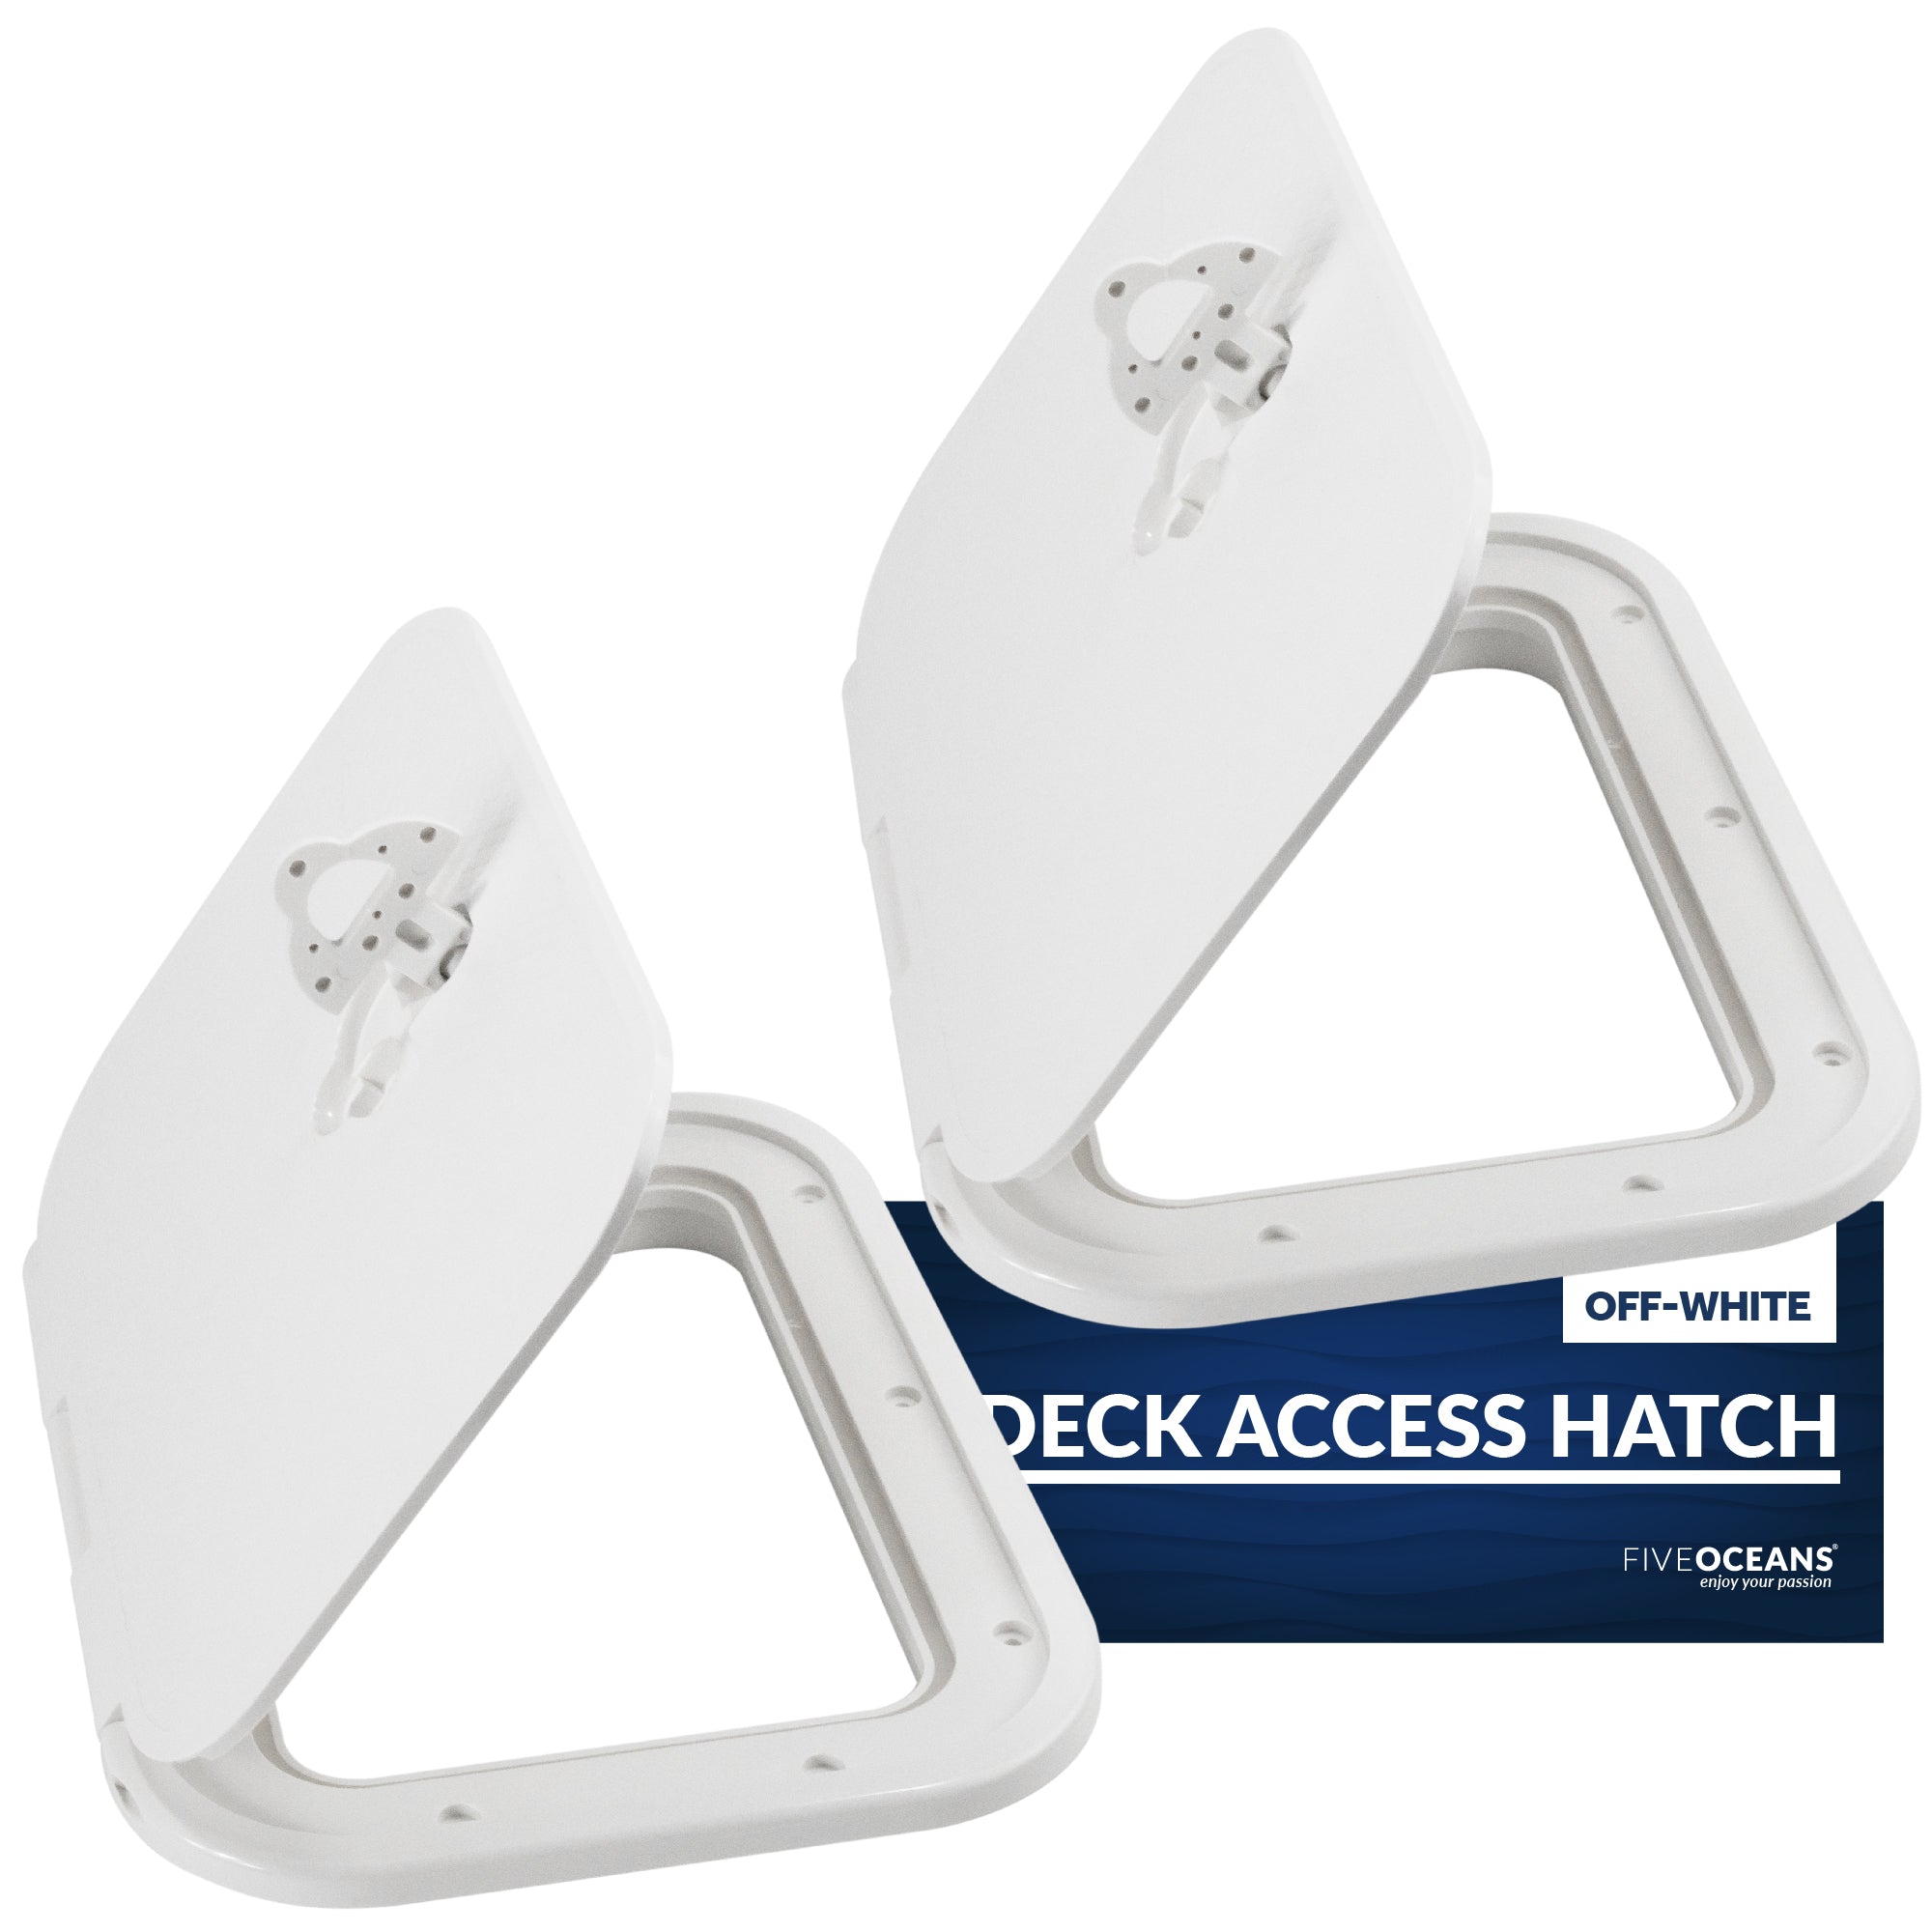 Boat Access Hatch, 10-7/8" x 14-3/4" Locking Slam Latch System, Off-White, 2-Pack - FO2078-M2